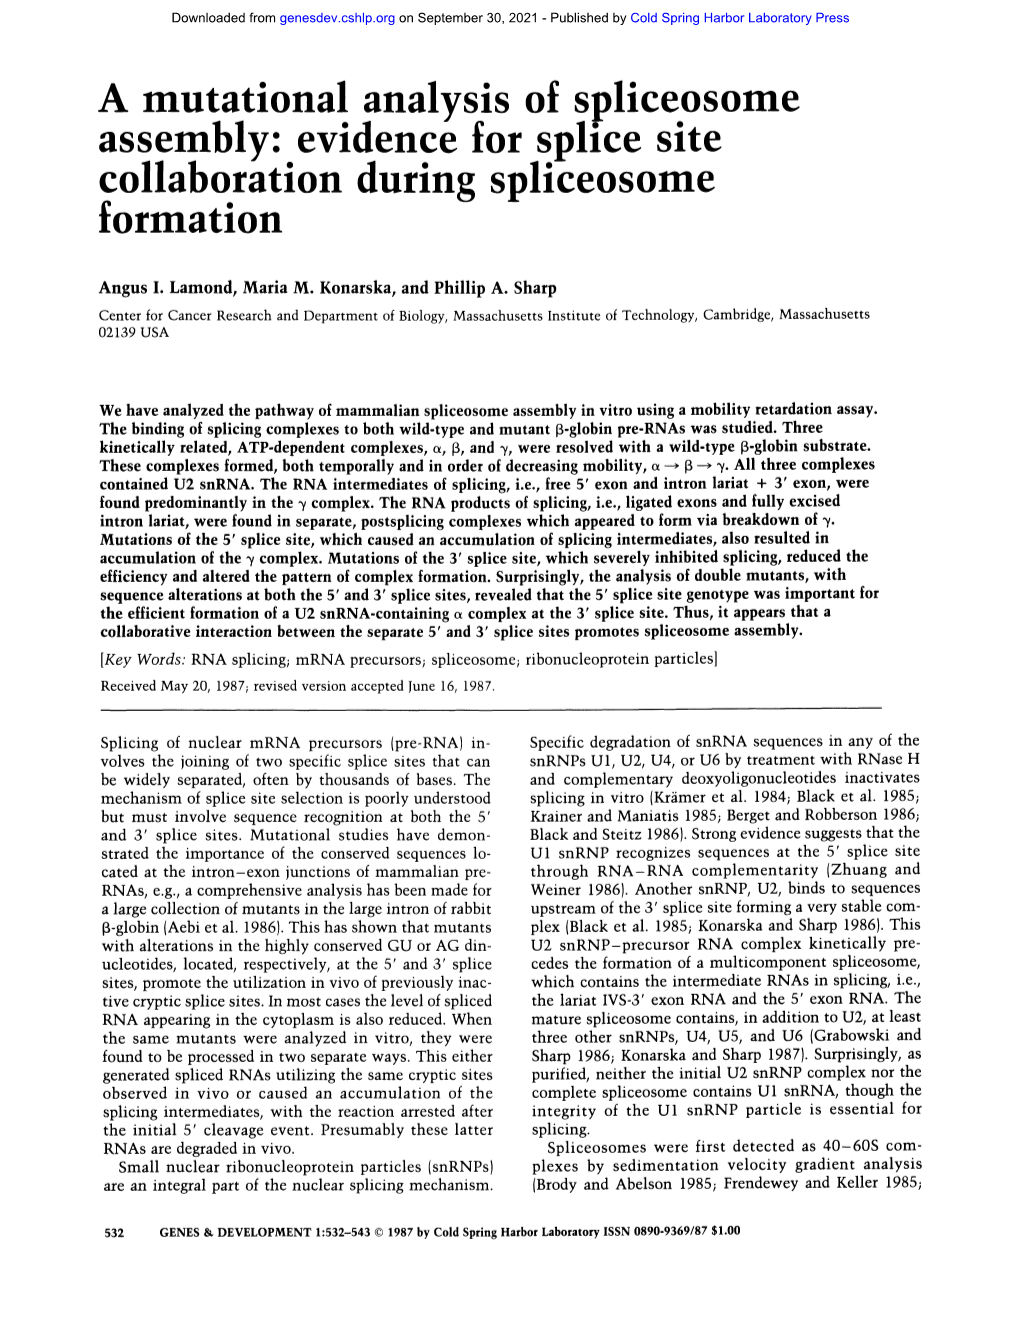 A Mutational Analysis of Spliceosome Assembly: Evidence for Splice Site Collaboration During Spliceosome Formation